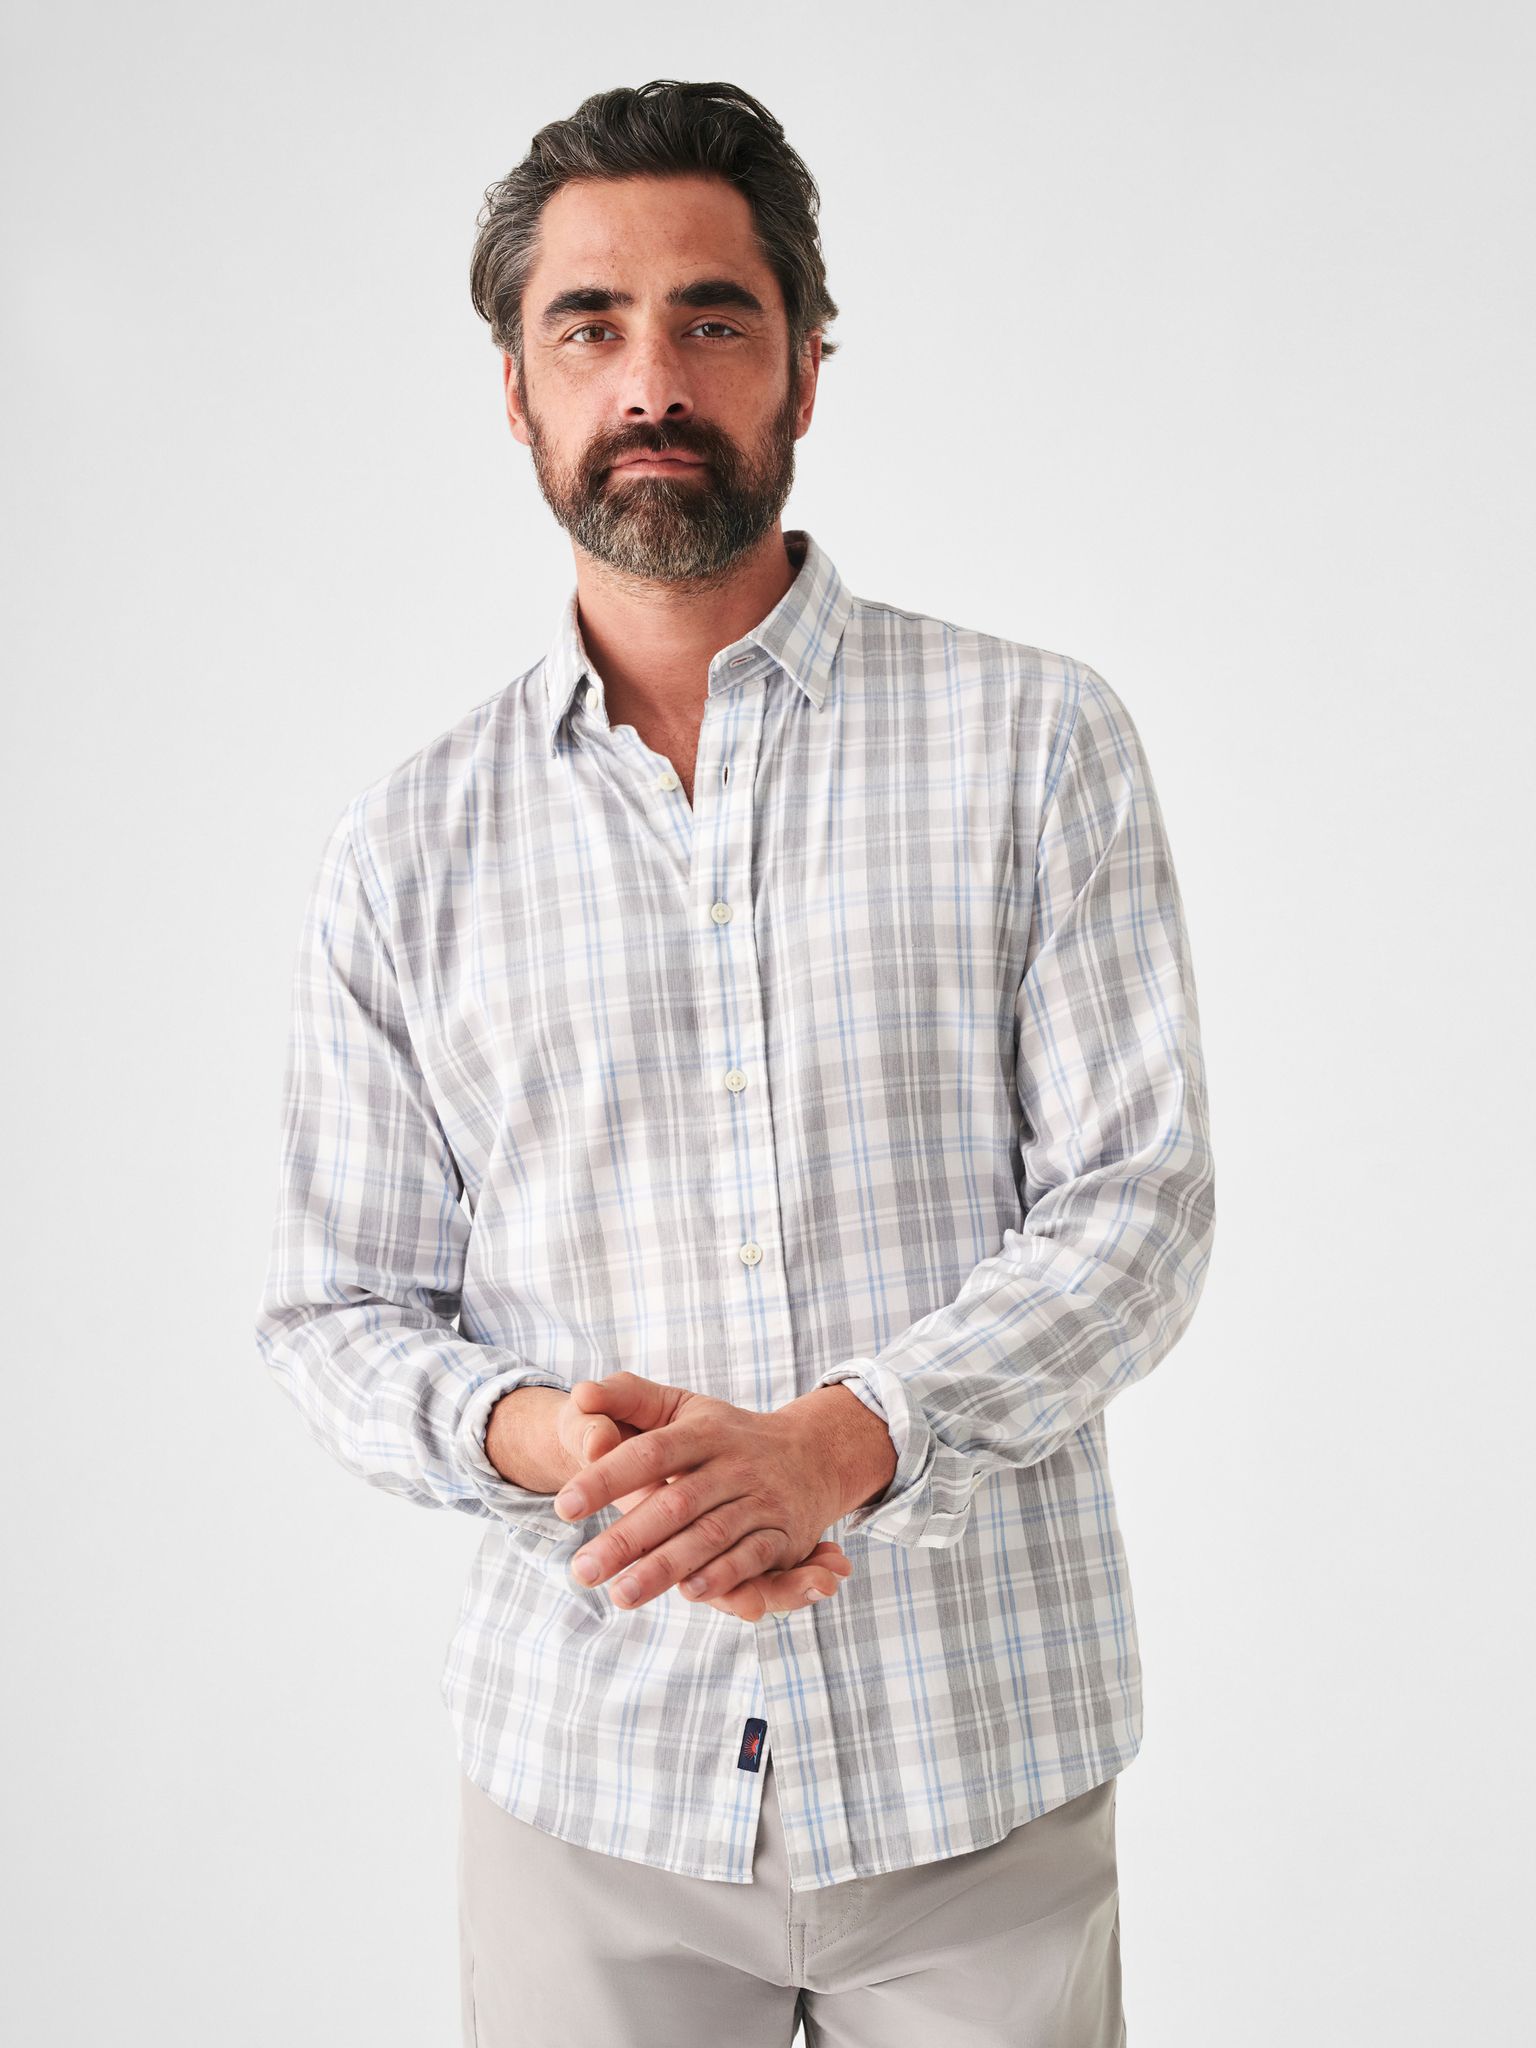 gray plaid long sleeve patterned shirt from Faherty